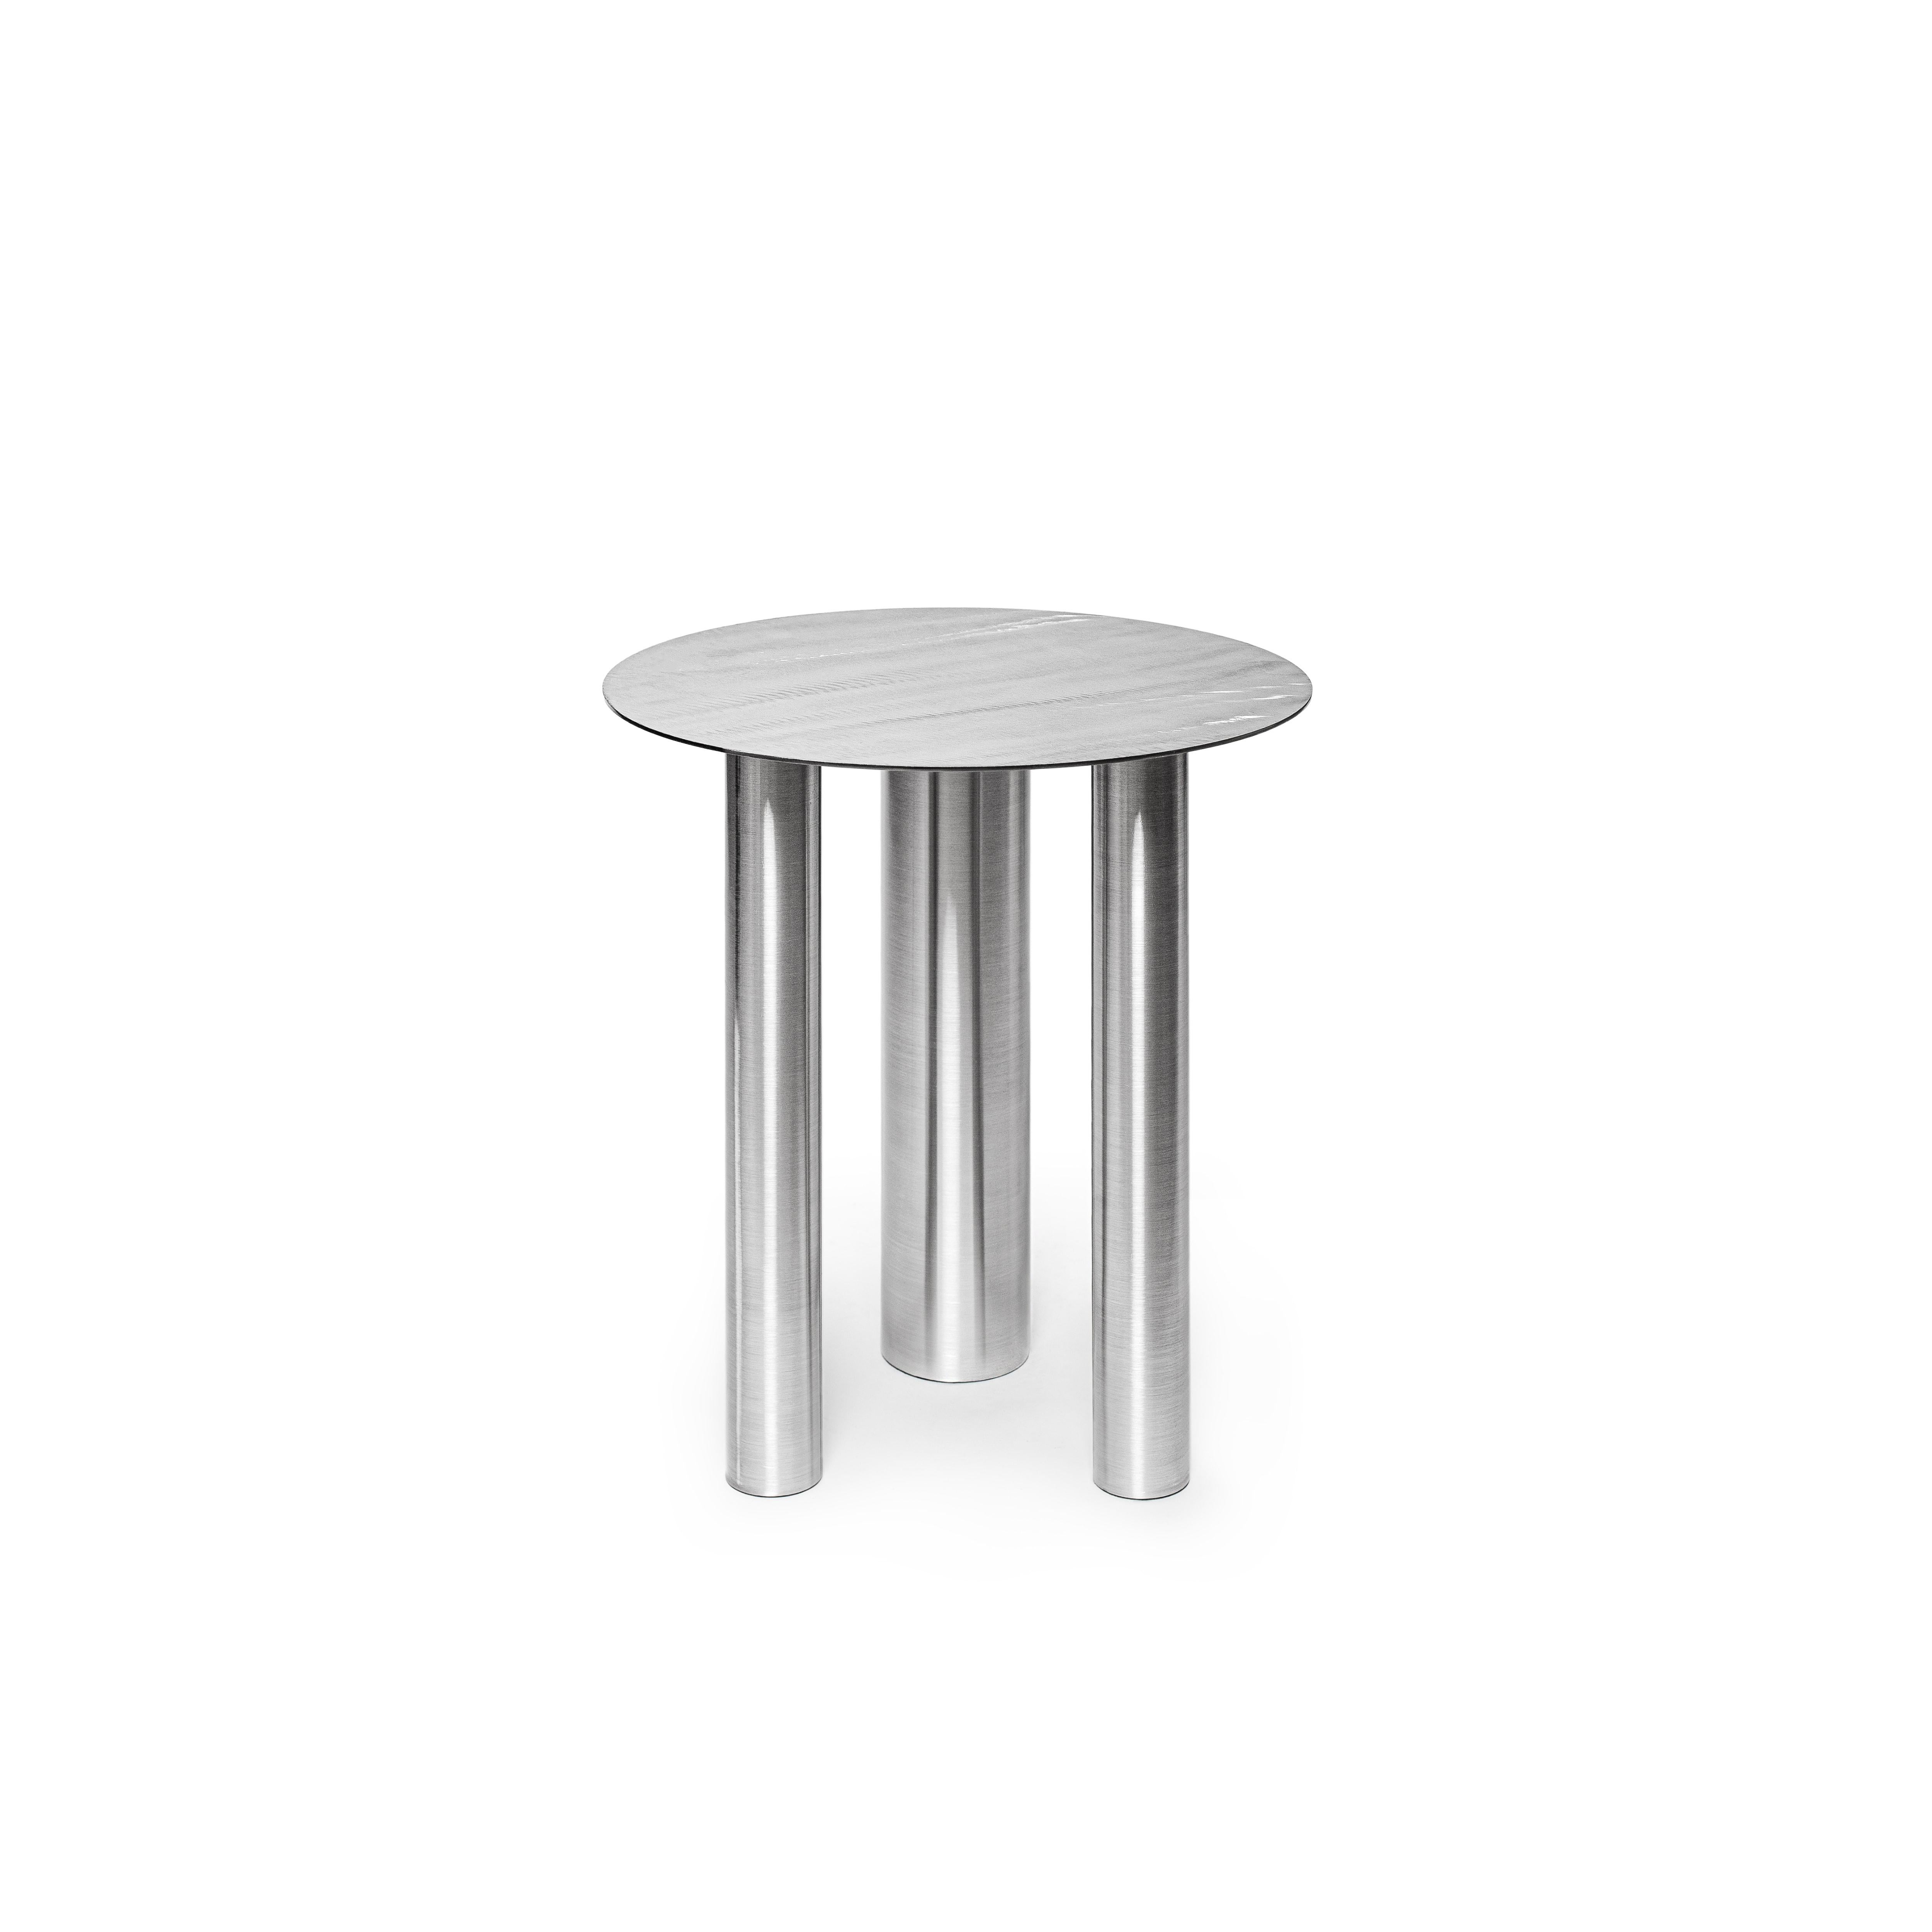 Set of Two Modern Coffee Tables Brandt CS1 made of Stainless Steel by NOOM 8